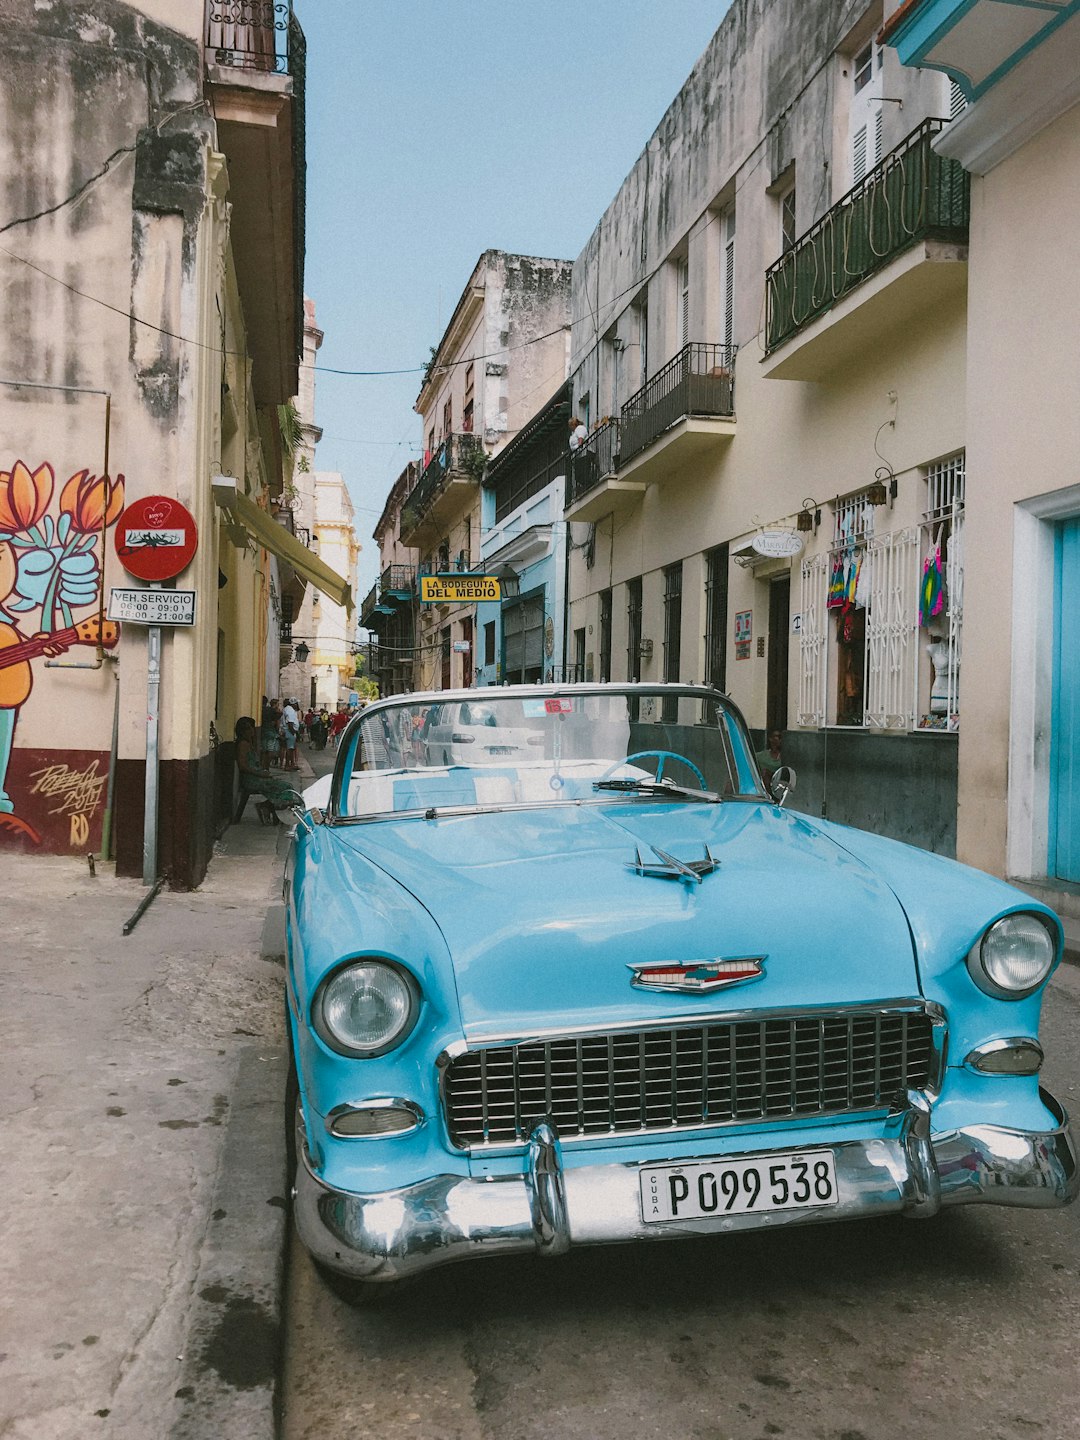 travelers stories about Town in Havana, Cuba